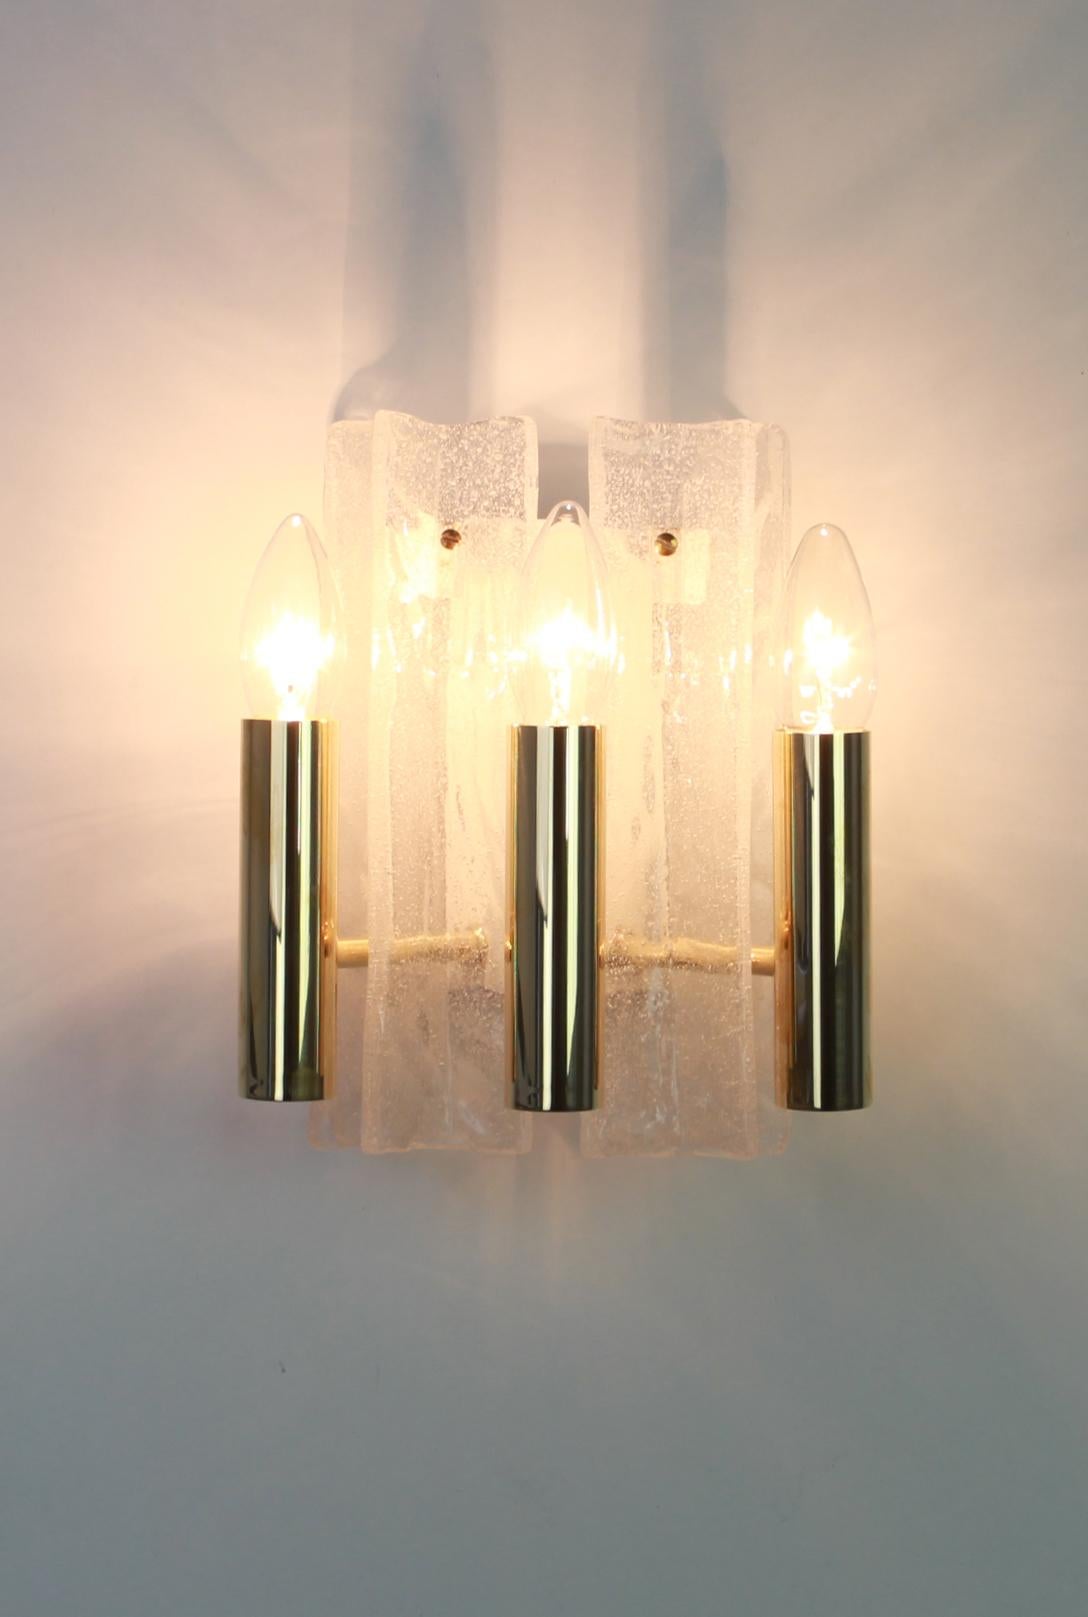 Wonderful pair of midcentury wall sconces with 4 Murano ice glass pieces, made by Kalmar, Austria, manufactured, circa 1960-1969.
Serie: Lipizza

Each fixture requires 3 x E14 small bulbs and is compatible with the US/UK/ etc ..